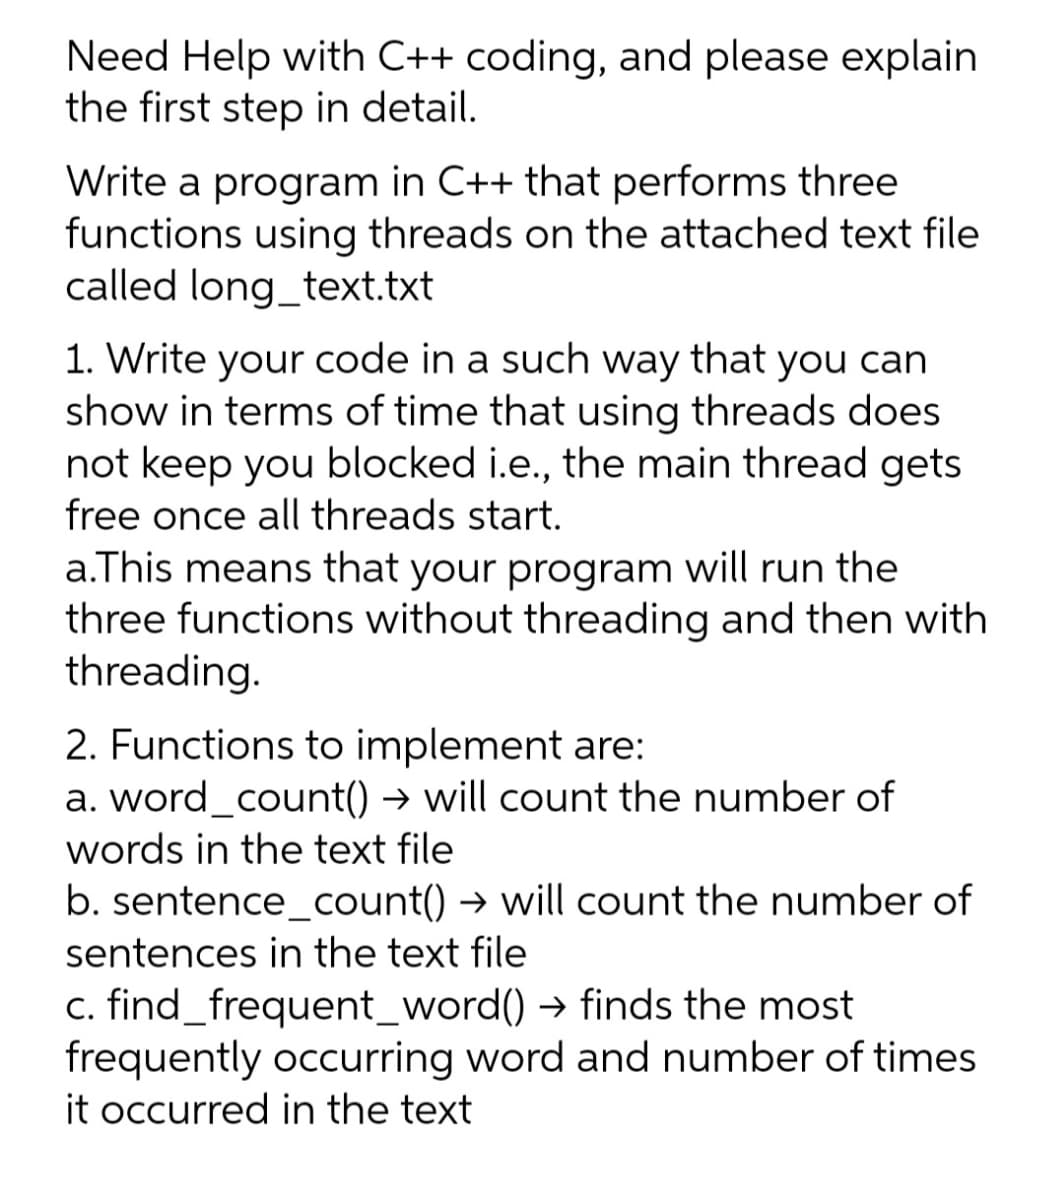 Need Help with C++ coding, and please explain
the first step in detail.
Write a program in C++ that performs three
functions using threads on the attached text file
called long_text.txt
1. Write your code in a such way that you can
show in terms of time that using threads does
not keep you blocked i.e., the main thread gets
free once all threads start.
a.This means that your program will run the
three functions without threading and then with
threading.
2. Functions to implement are:
a. word_count() → will count the number of
words in the text file
b. sentence_count() → will count the number of
sentences in the text file
c. find_frequent_word() → finds the most
frequently occurring word and number of times
it occurred in the text
